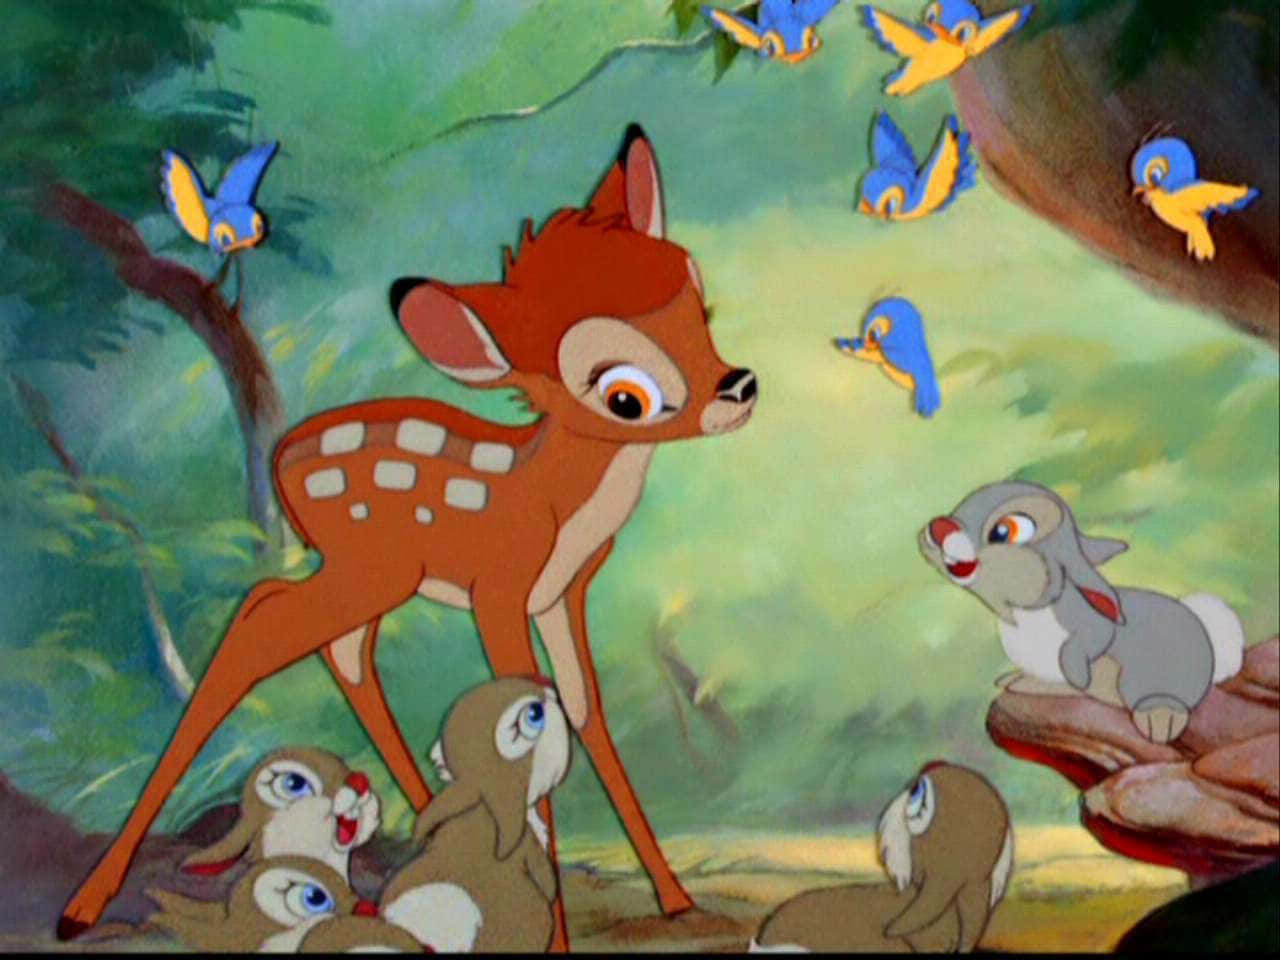 Bambi meets new friends in the peaceful forest